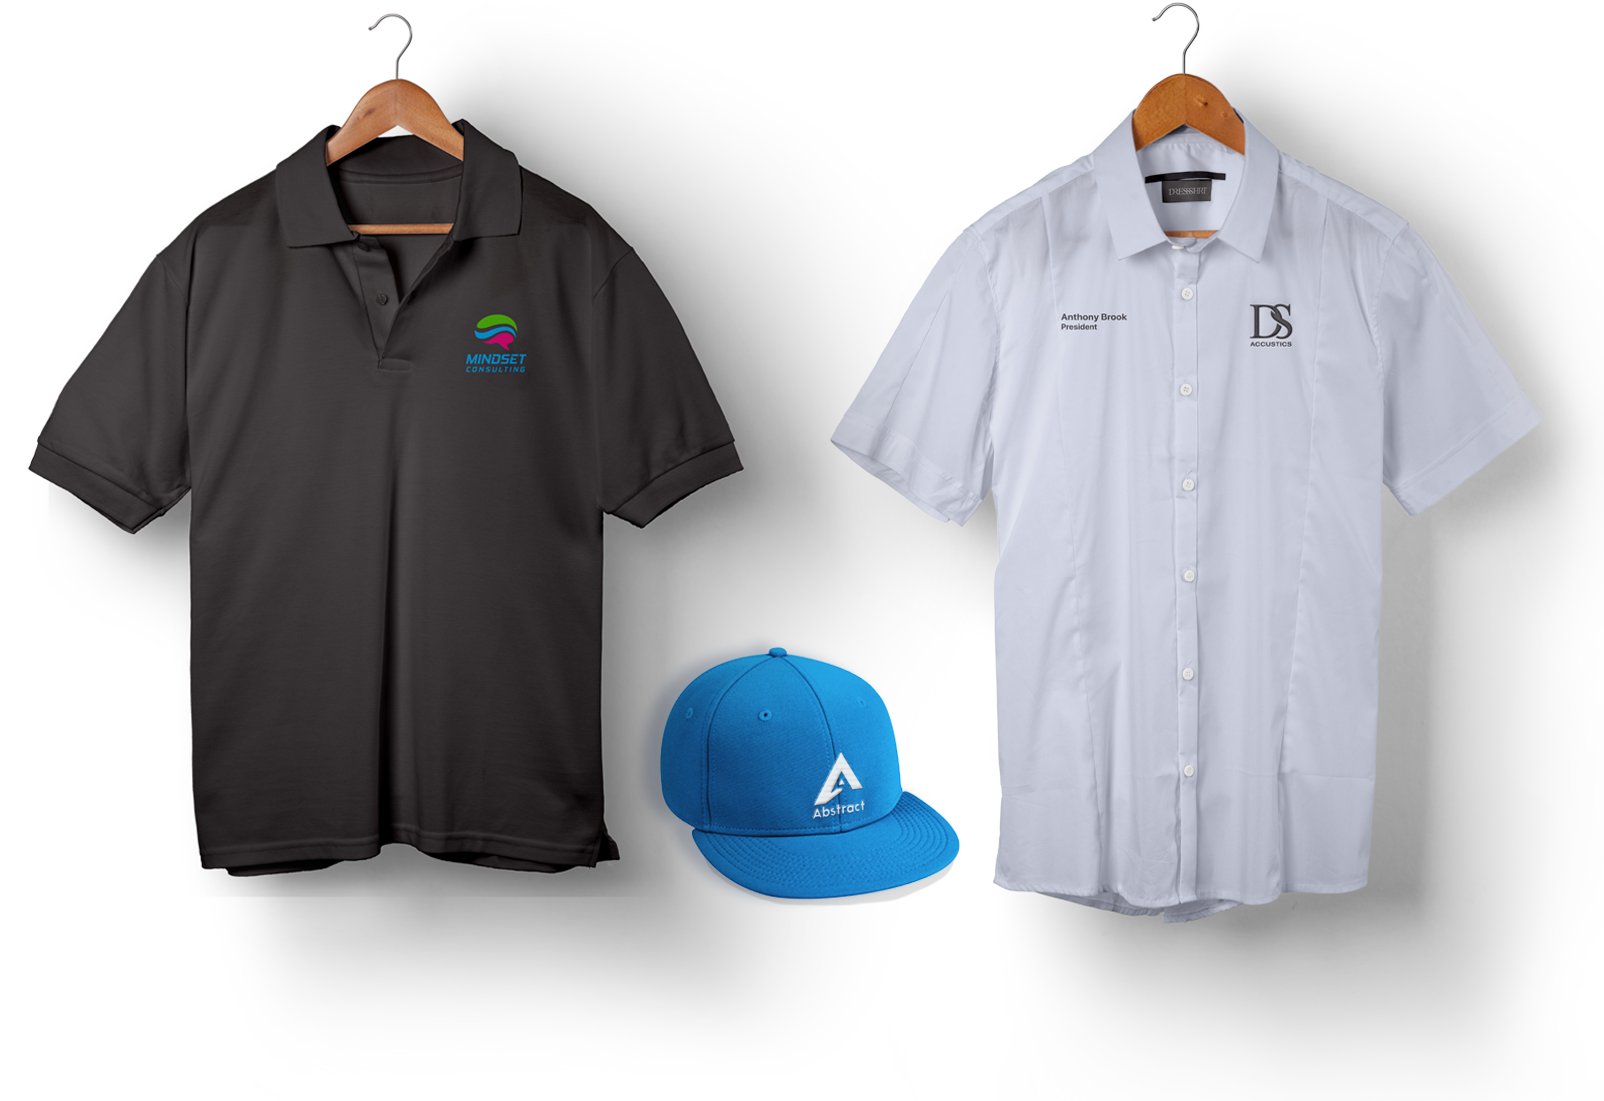 tshirt printing and embroidery in Miami, FL